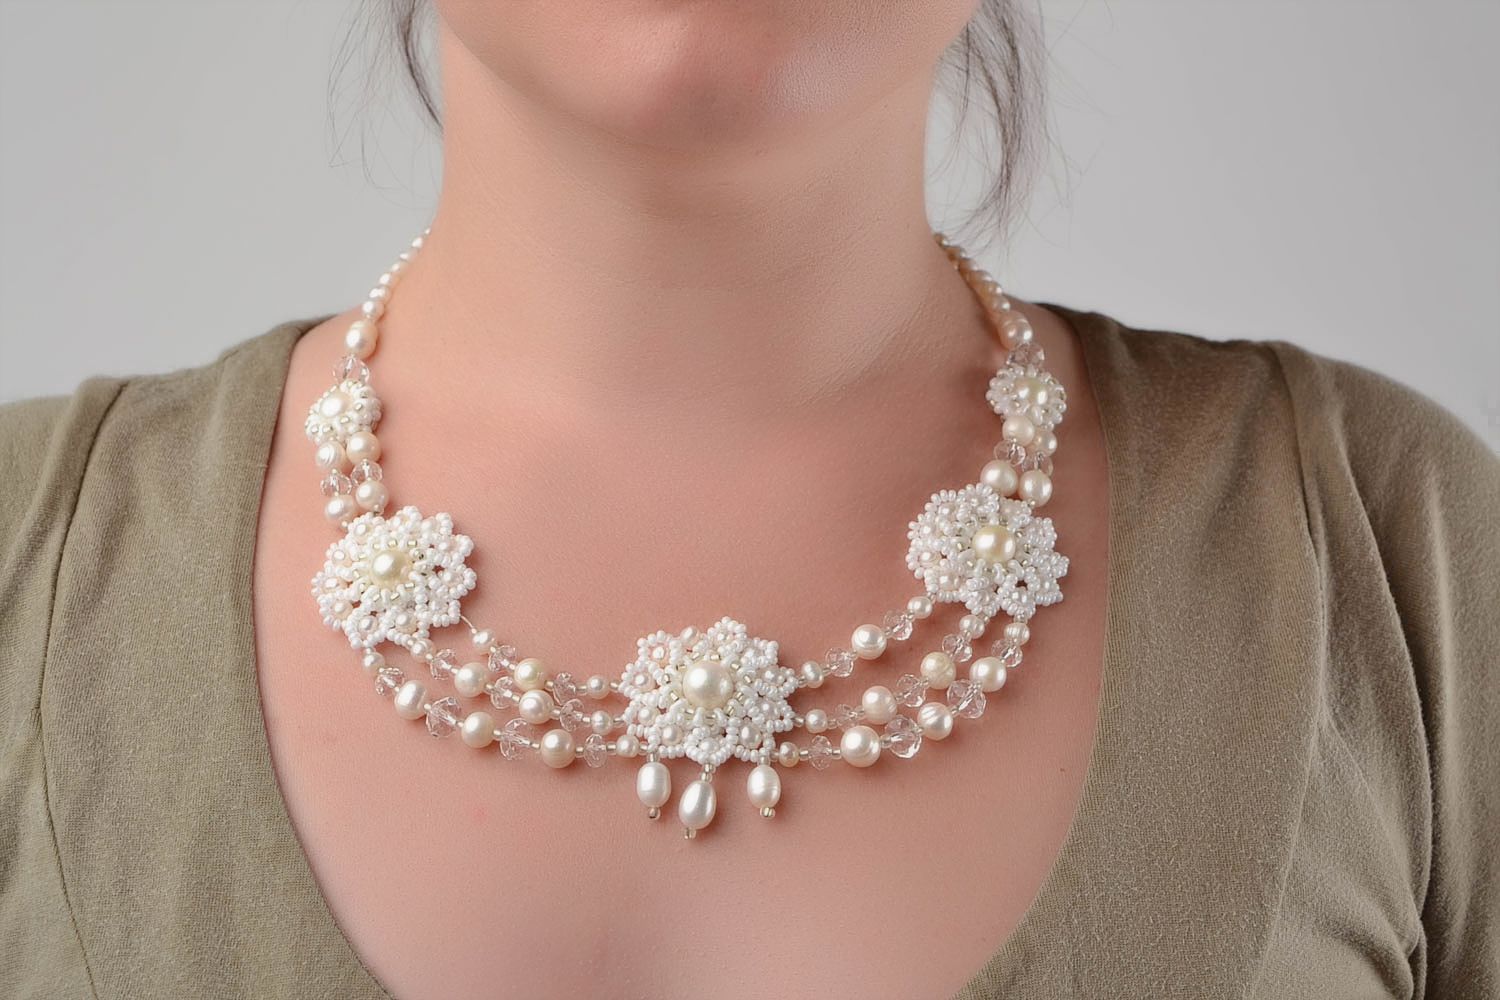 Beautiful festive handmade white necklace made of beads and natural stones photo 1